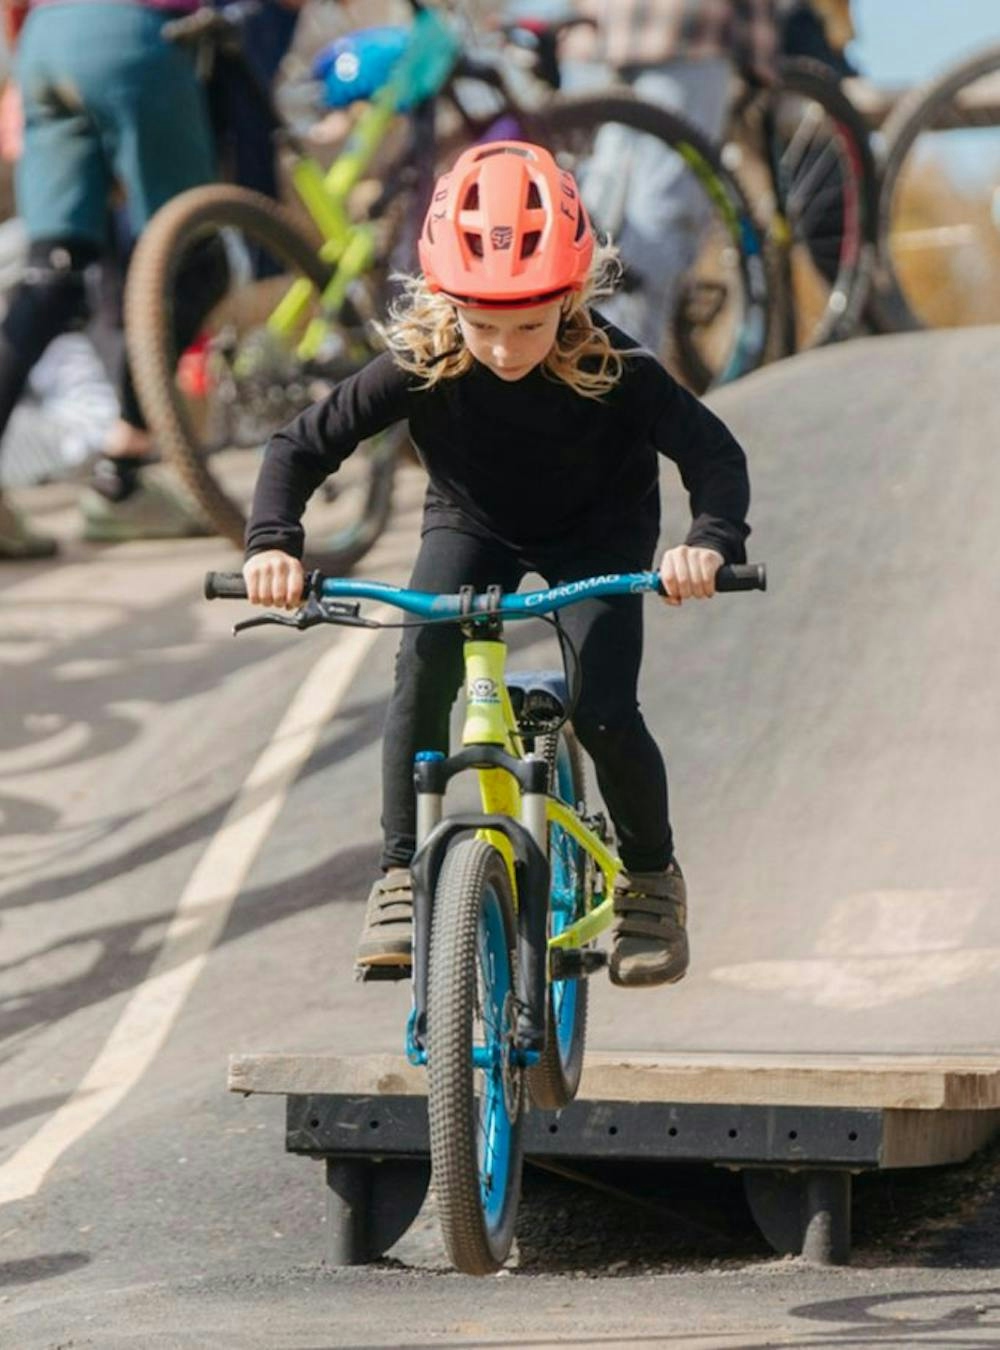 A young girl riding her bike off of a wood ramp on a paved pump track